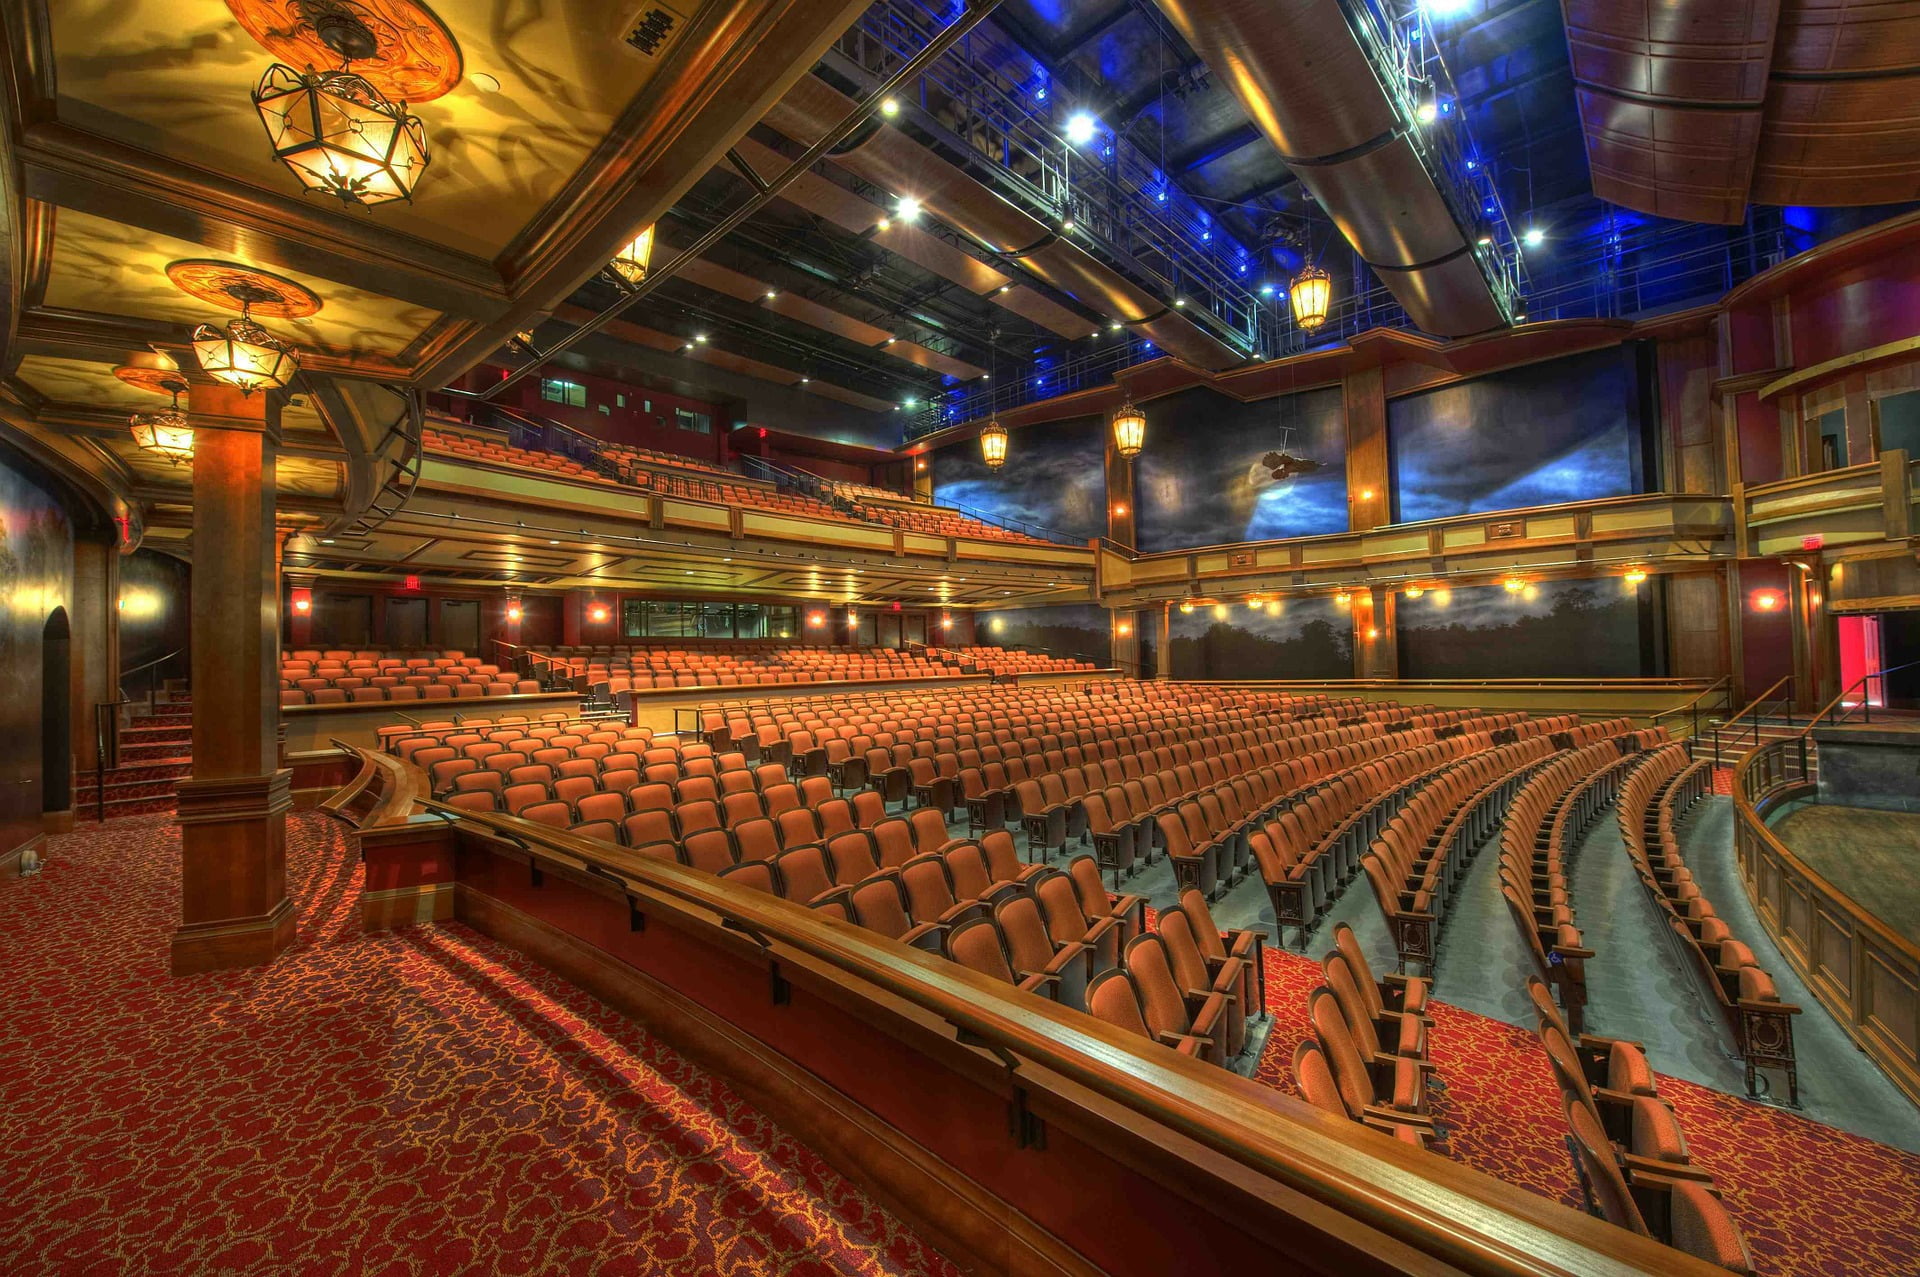 A grand theatre hall with tiered seating, a high ceiling, and gallery seating